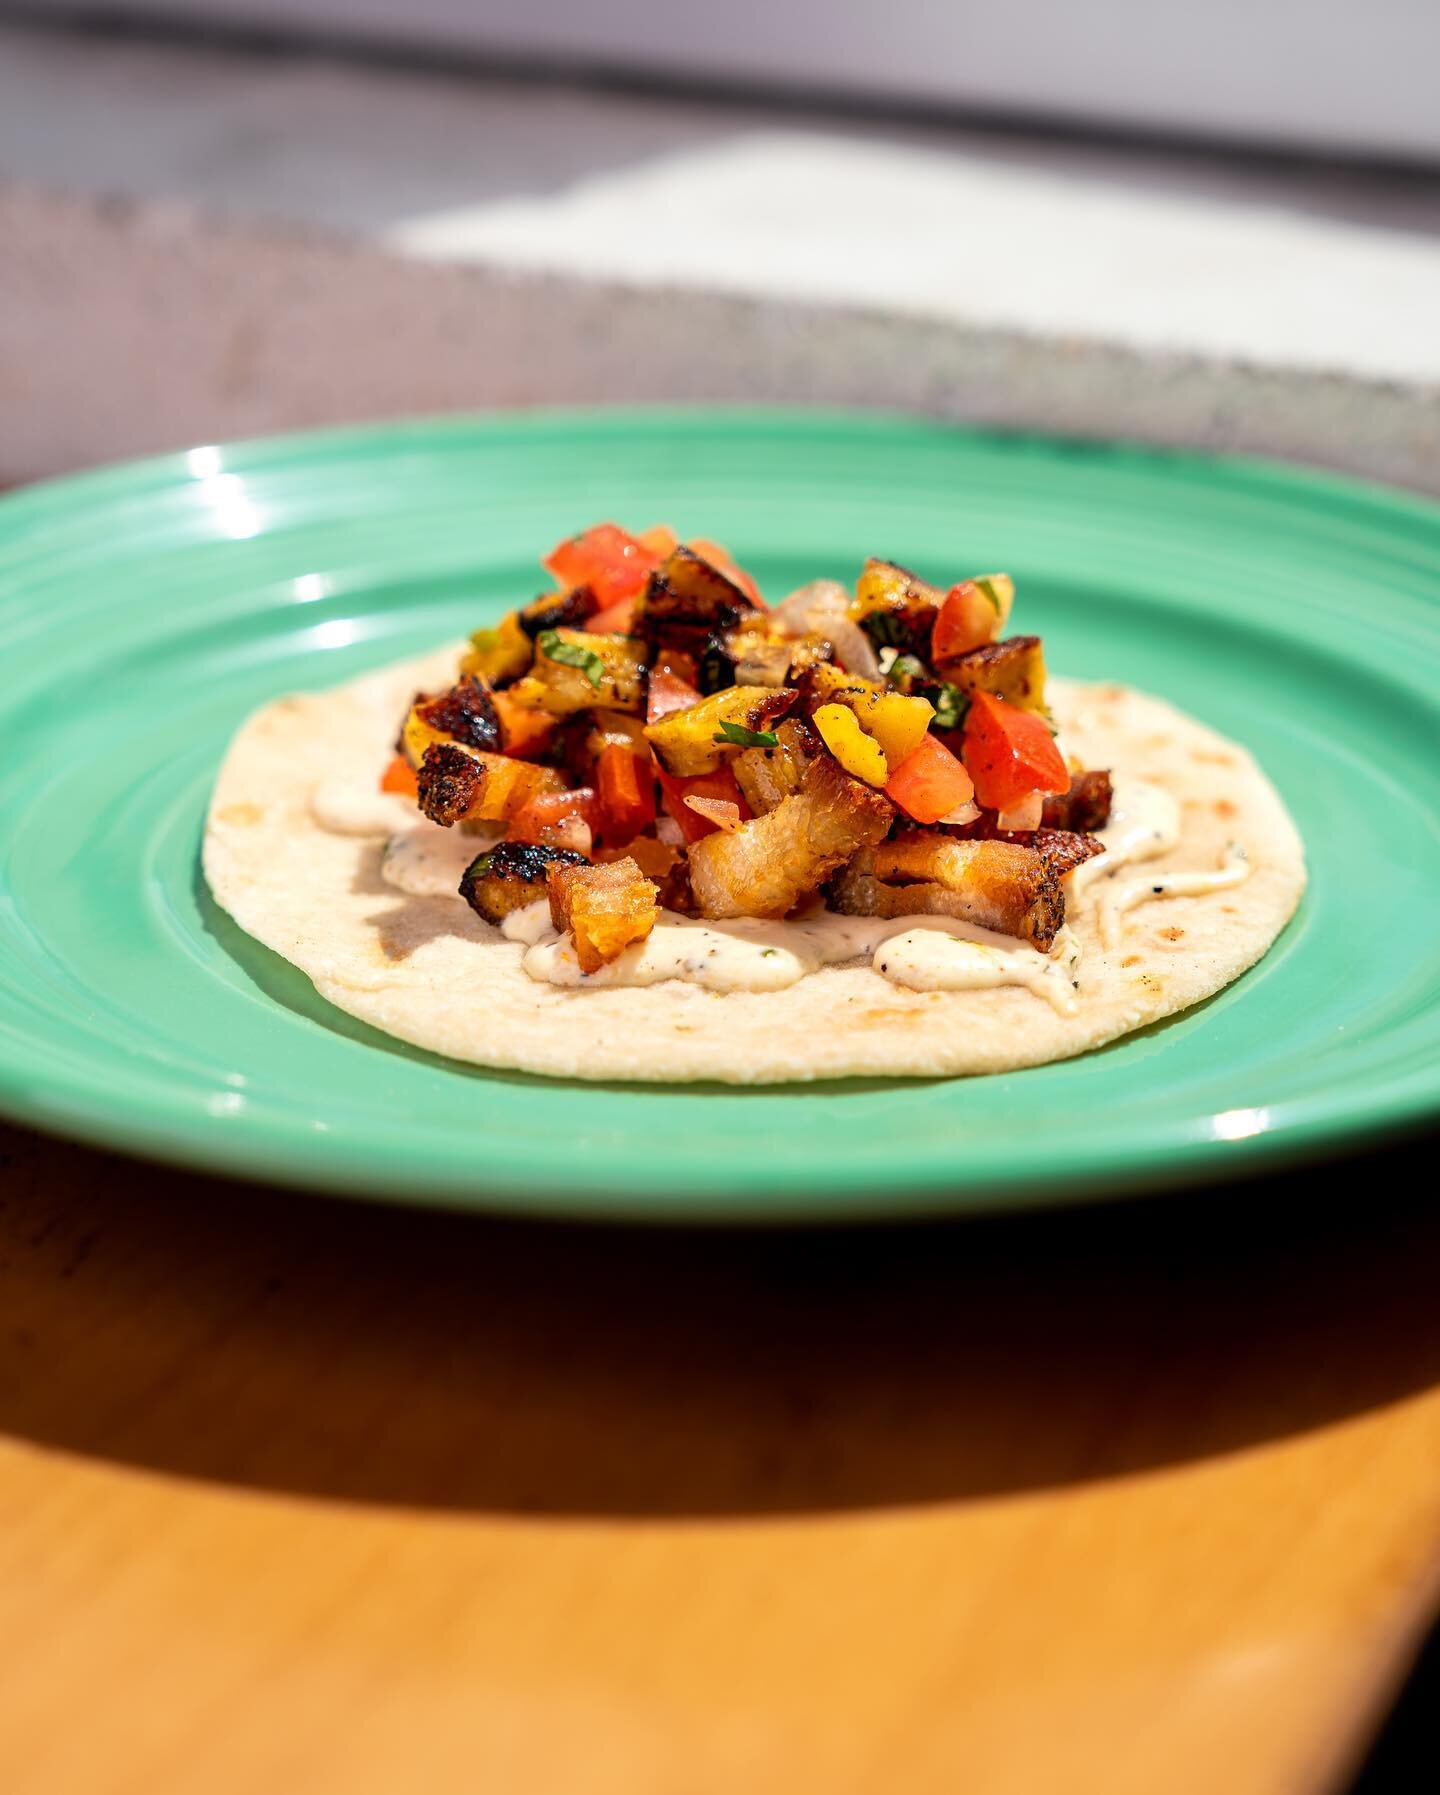 New Taco Alert! Come try it out tonight, see you soon for Taco Tuesday!

Pictured: Mojo Pork Belly Taco
Crispy Pork Belly/ Mojo Crema/ caramelized Maduro Salsa

One of THREE new tacos that joined the menu. We love these new ingredients and flavors, c